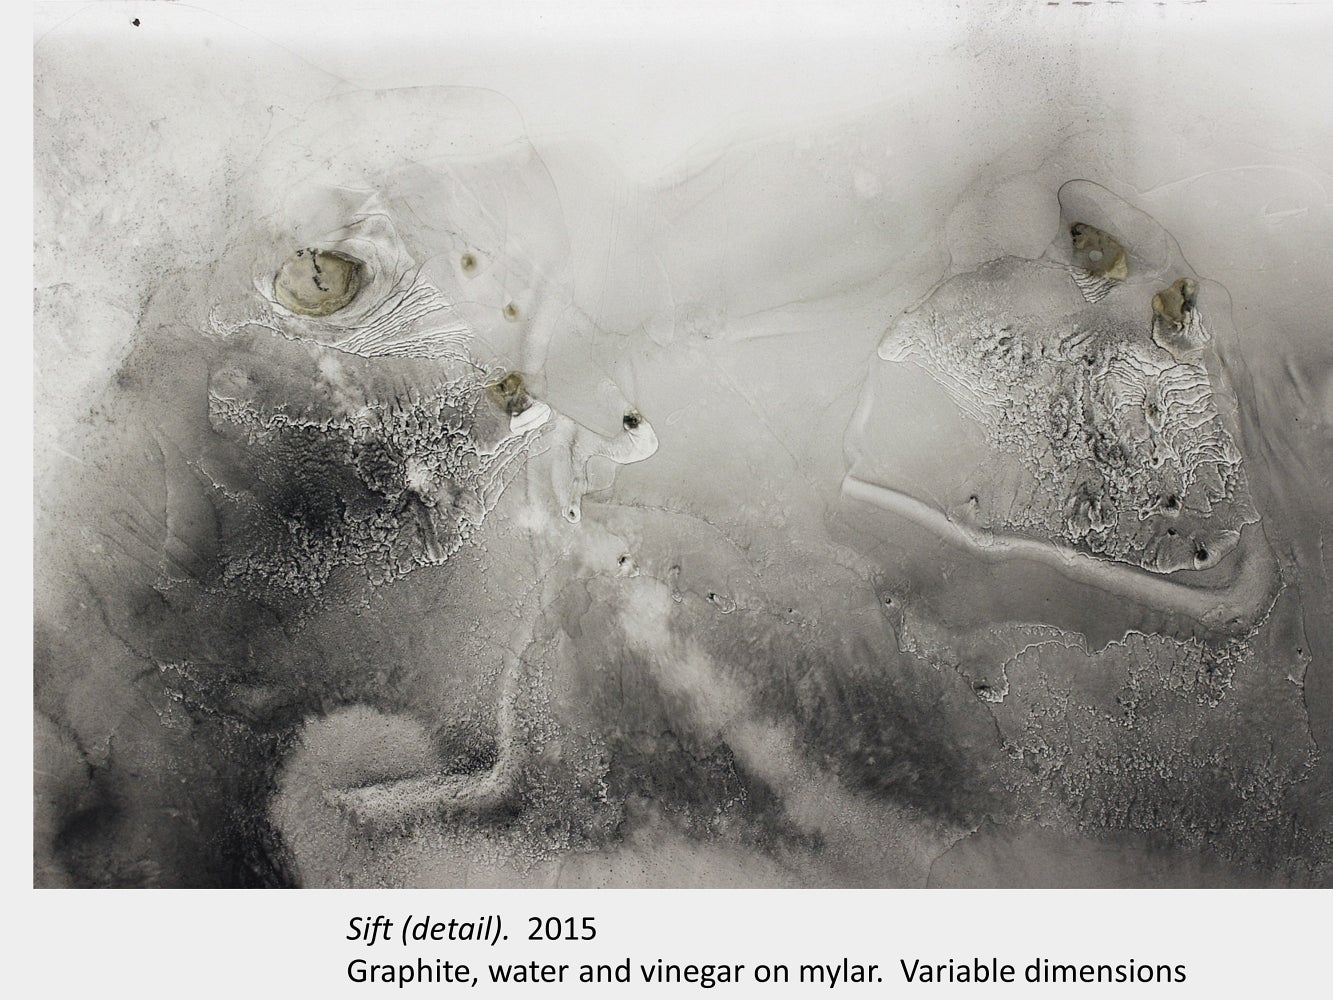 Artwork by Sarah Kernohan. Sift (detail). 2015. Graphite, water and vinegar on mylar. Variable dimensions.